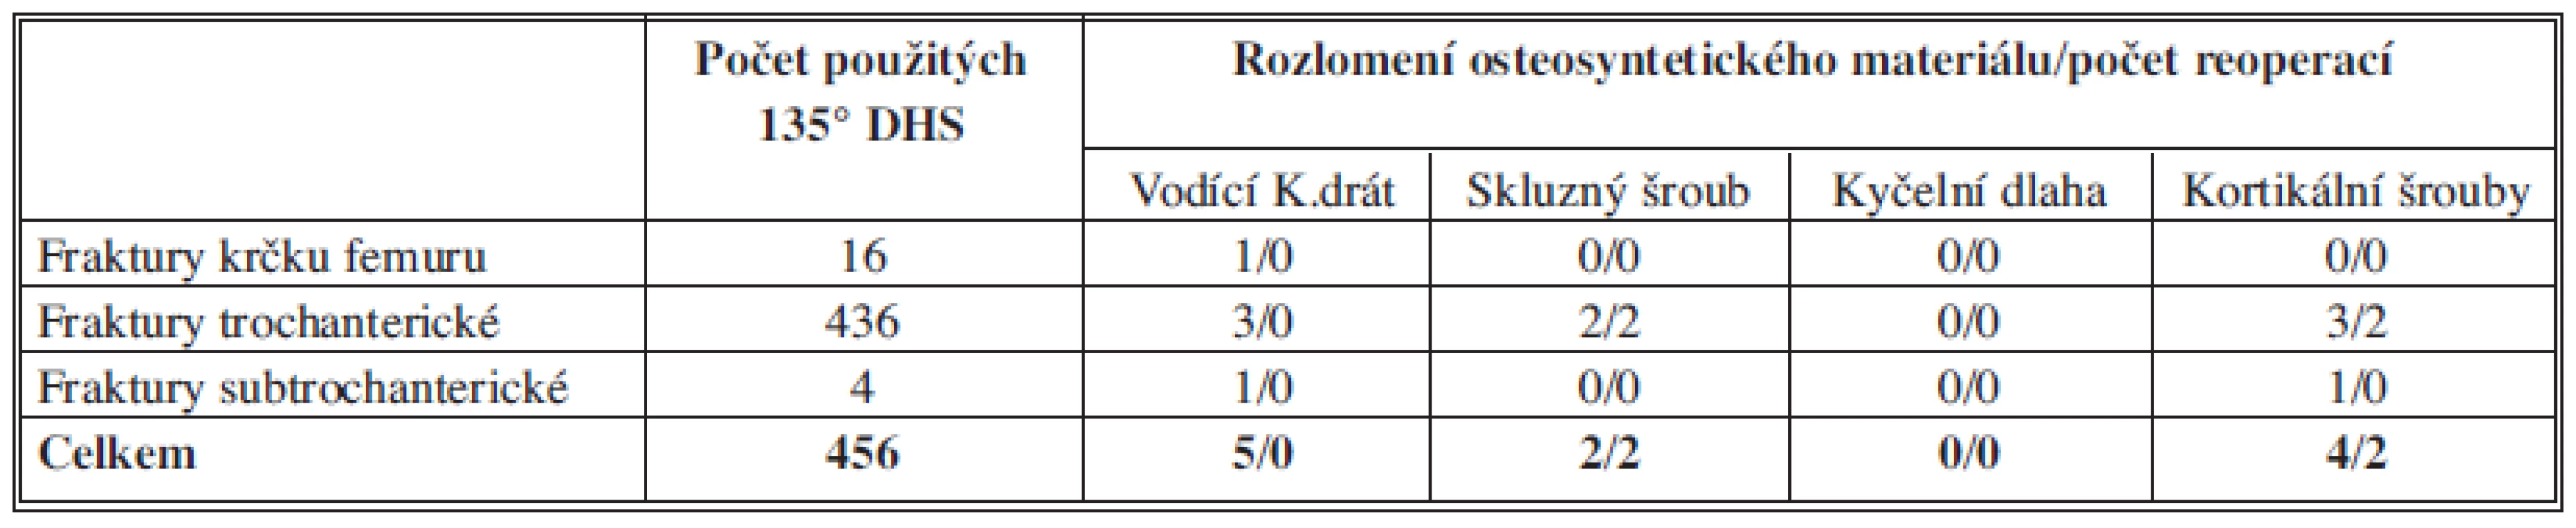 Počet použitých 135° DHS, rozlomení osteosyntetického materiálu a reoperací u zlomenin proximálního femuru
Tab. 1: The number of 135° DHS used, osteosynthetic material breakages and reoperations in proximal femoral fractures